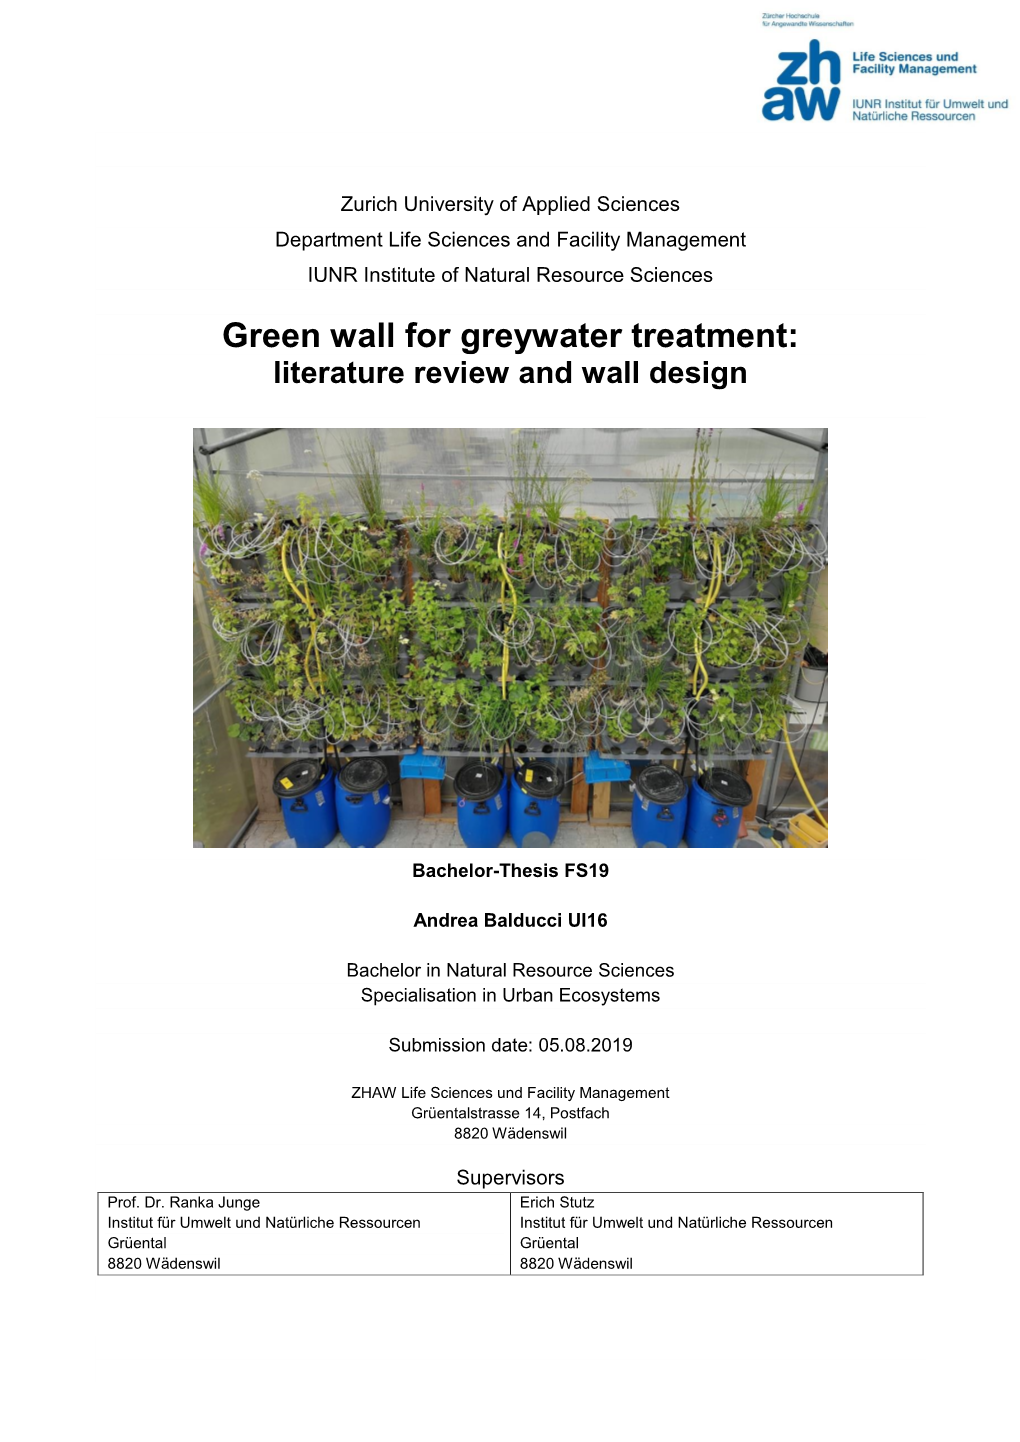 Green Wall for Greywater Treatment: Literature Review and Wall Design